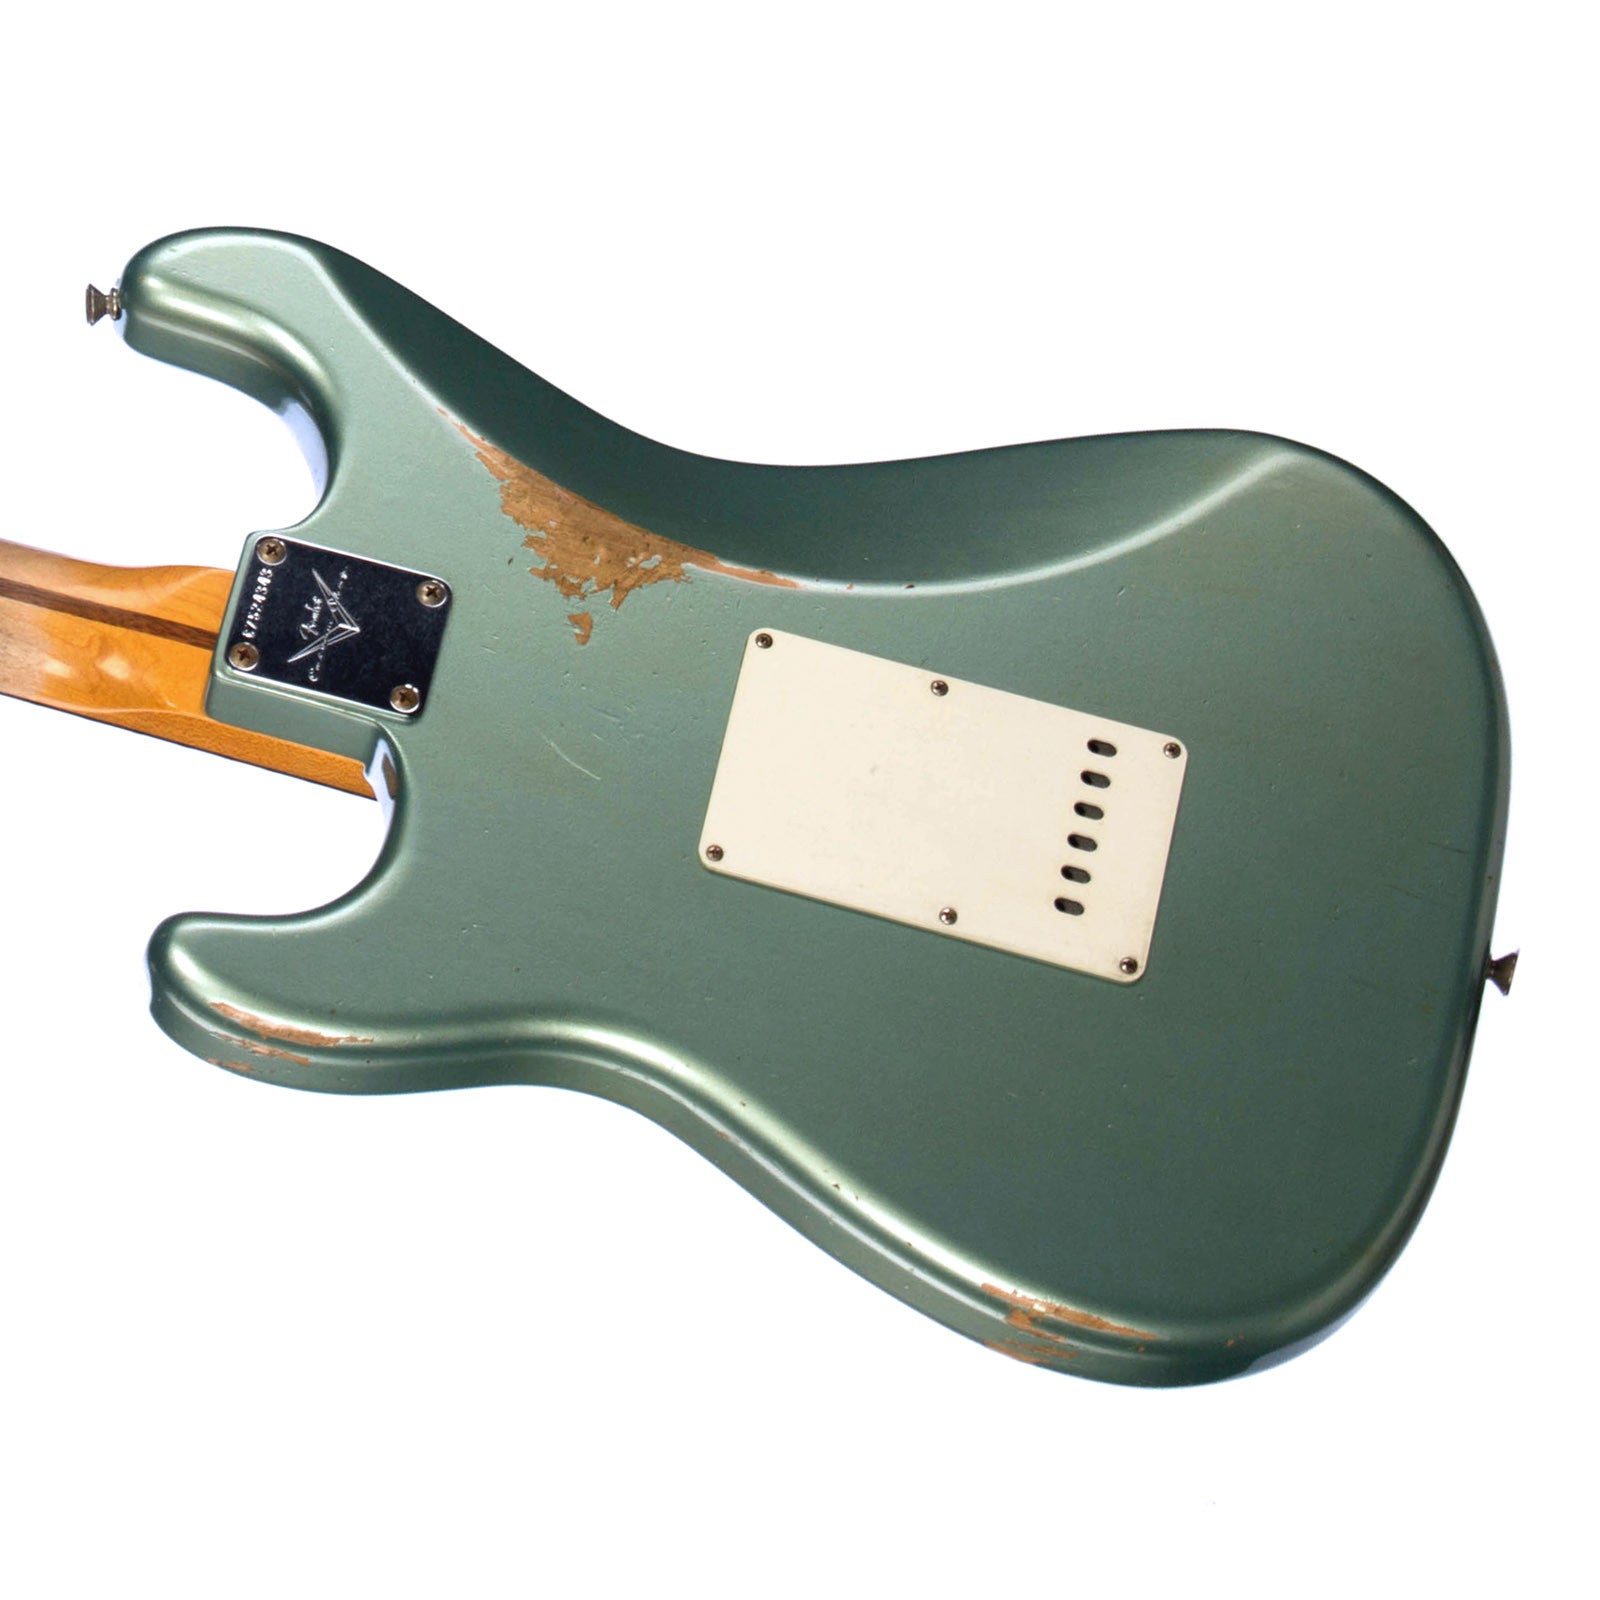 Fender Special Edition Player Stratocaster Surf Green (Tortoise